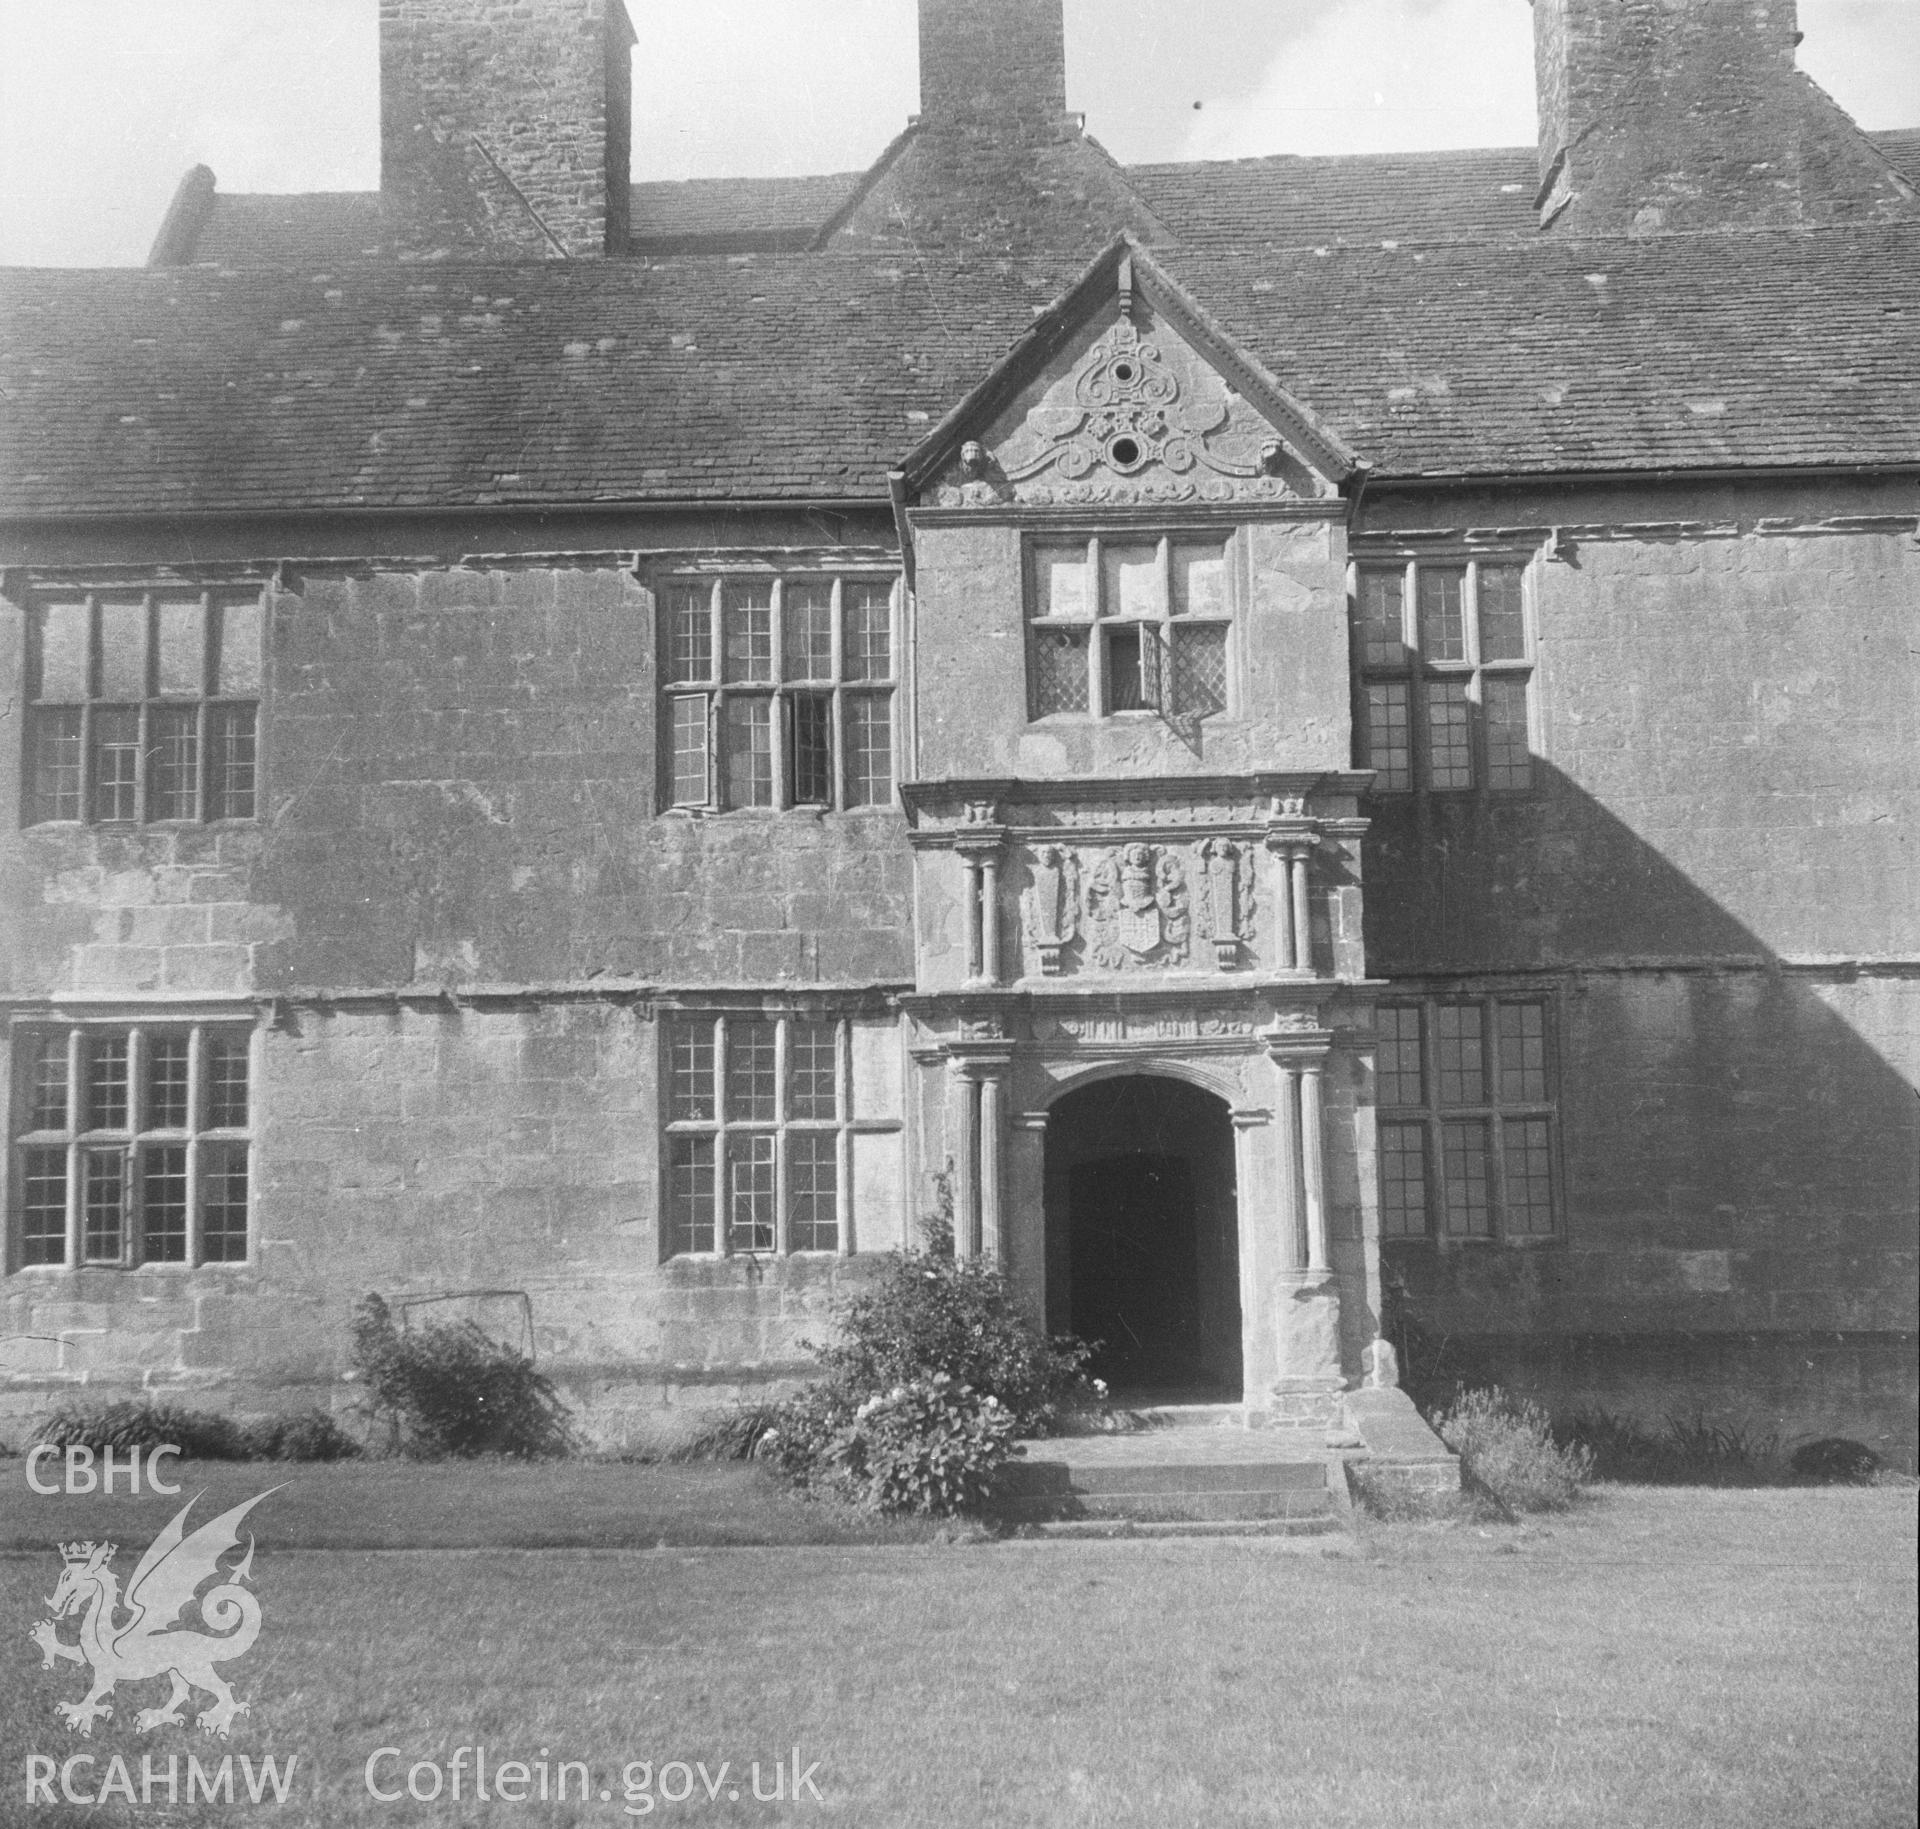 Digital copy of an undated nitrate negative showing front elevation of Treowen, Monmouthshire.